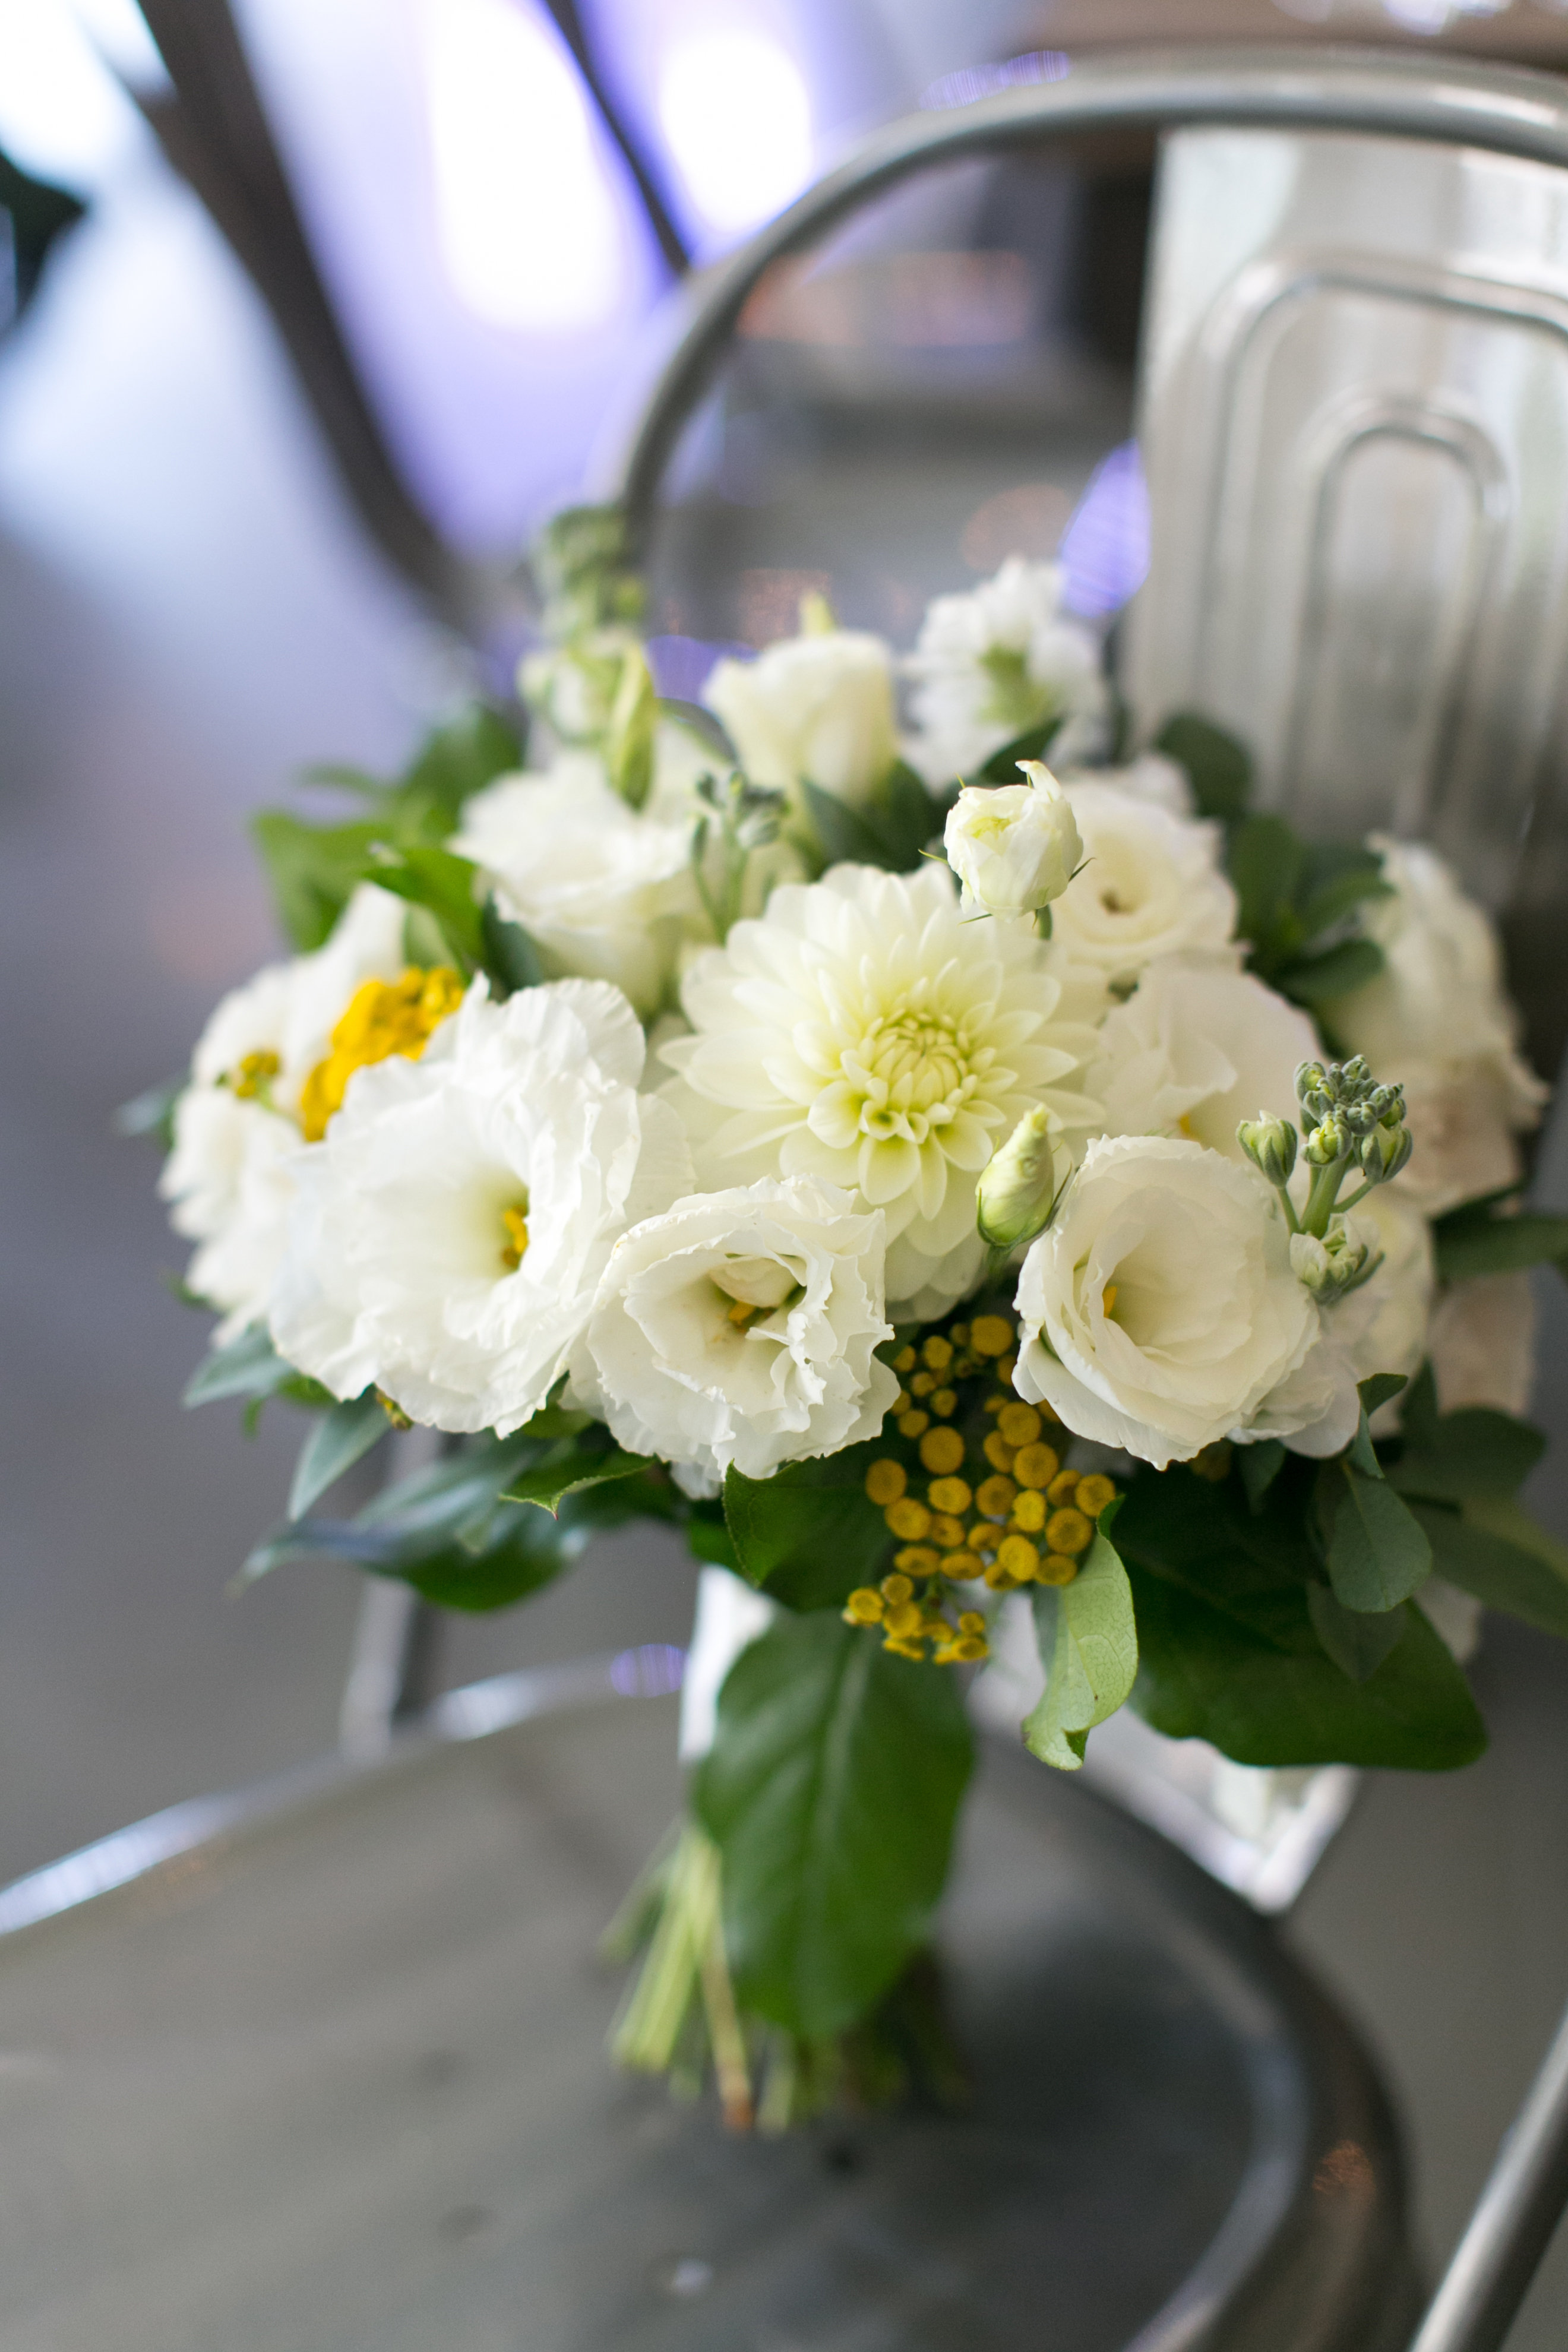 Yellow and ivory wedding bouquet with lisianthus and dahlias in contemporary venue.